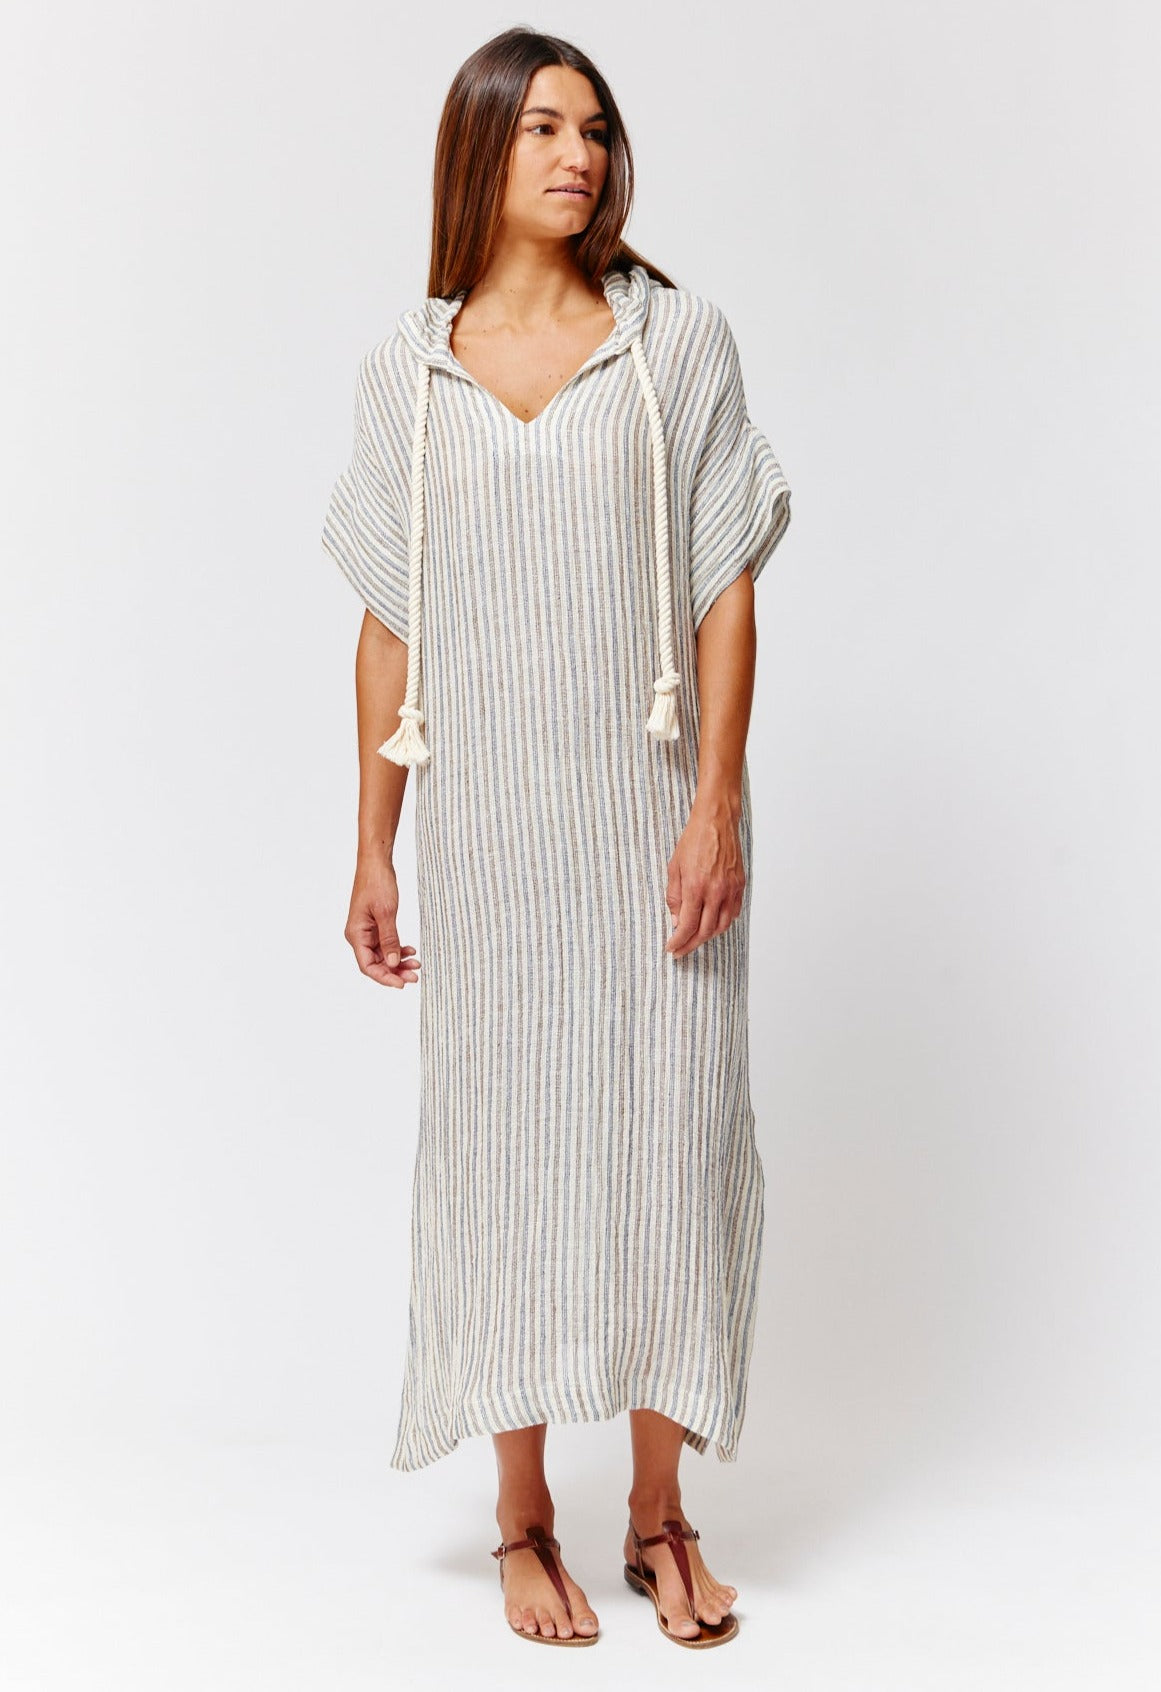 THE DRAWSTRING HOODED CAFTAN in NATURAL/NAVY/BROWN STRIPED CHIOS GAUZE